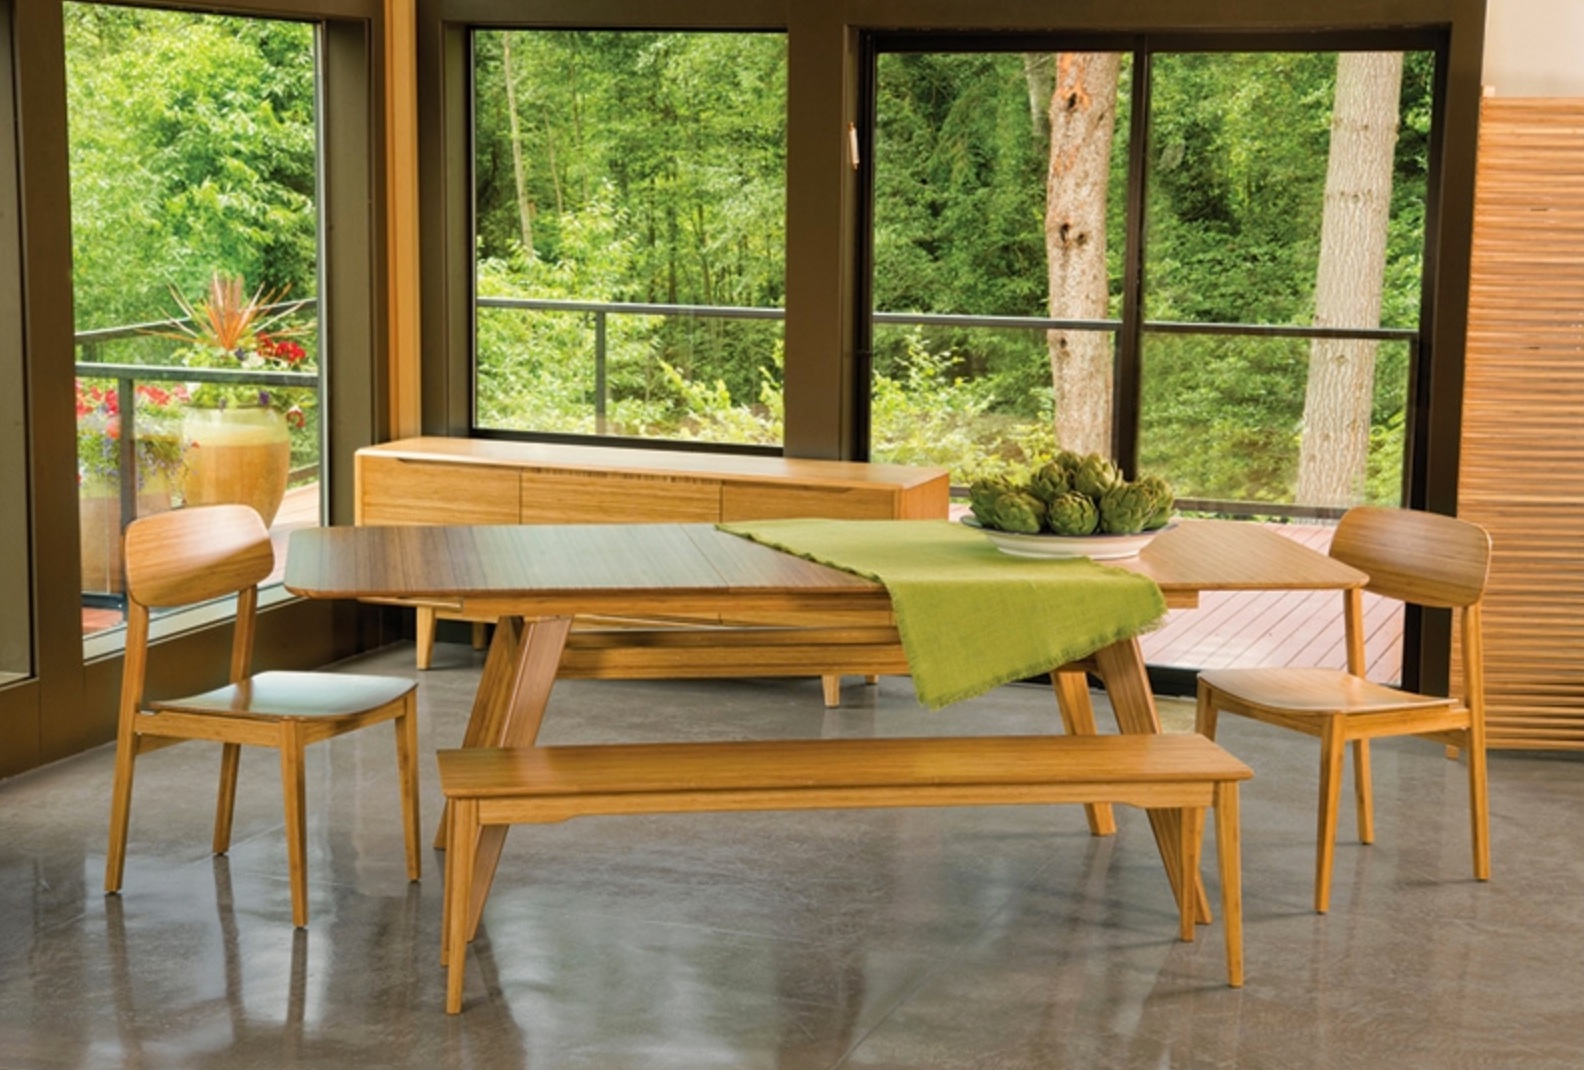 The Eco-Friendly Currant Extension Dining Table